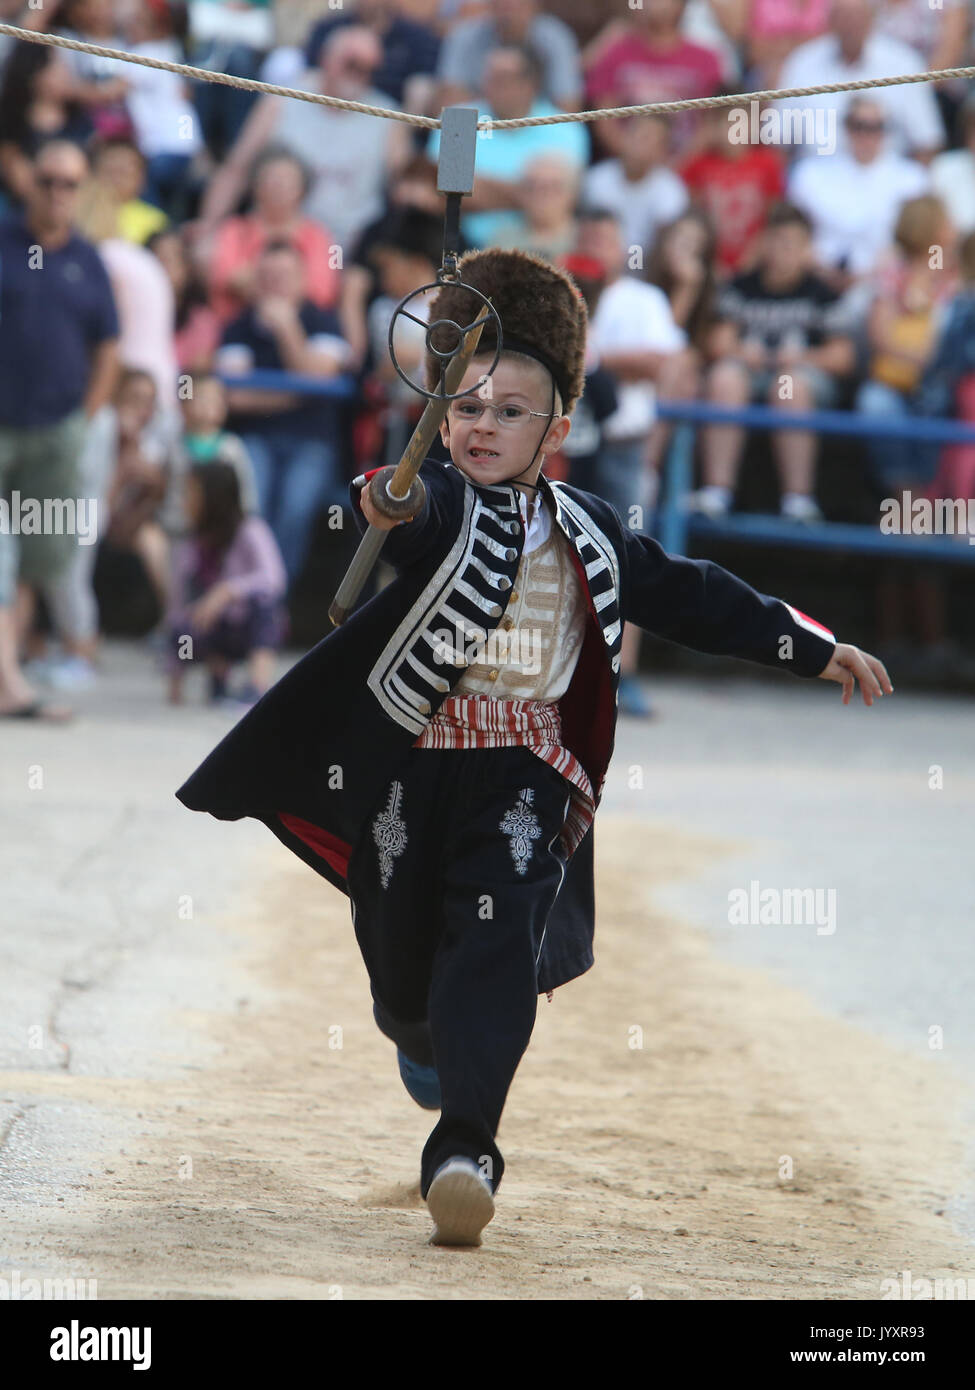 (170821) -- VUCKOVICI (CROATIA), Aug. 21, 2017 (Xinhua) -- A Boy participates in the Children's Alka lancing tournament in the village of Vuckovici, Croatia, on Aug. 20, 2017. Children's Alka is a lancing tournament held every August for boys up to ten years old since 1955 to commemorate their brave ancestors who defeated the Ottomans in 1715. (Xinhua/Ivo Cagalj) (zcc) Stock Photo